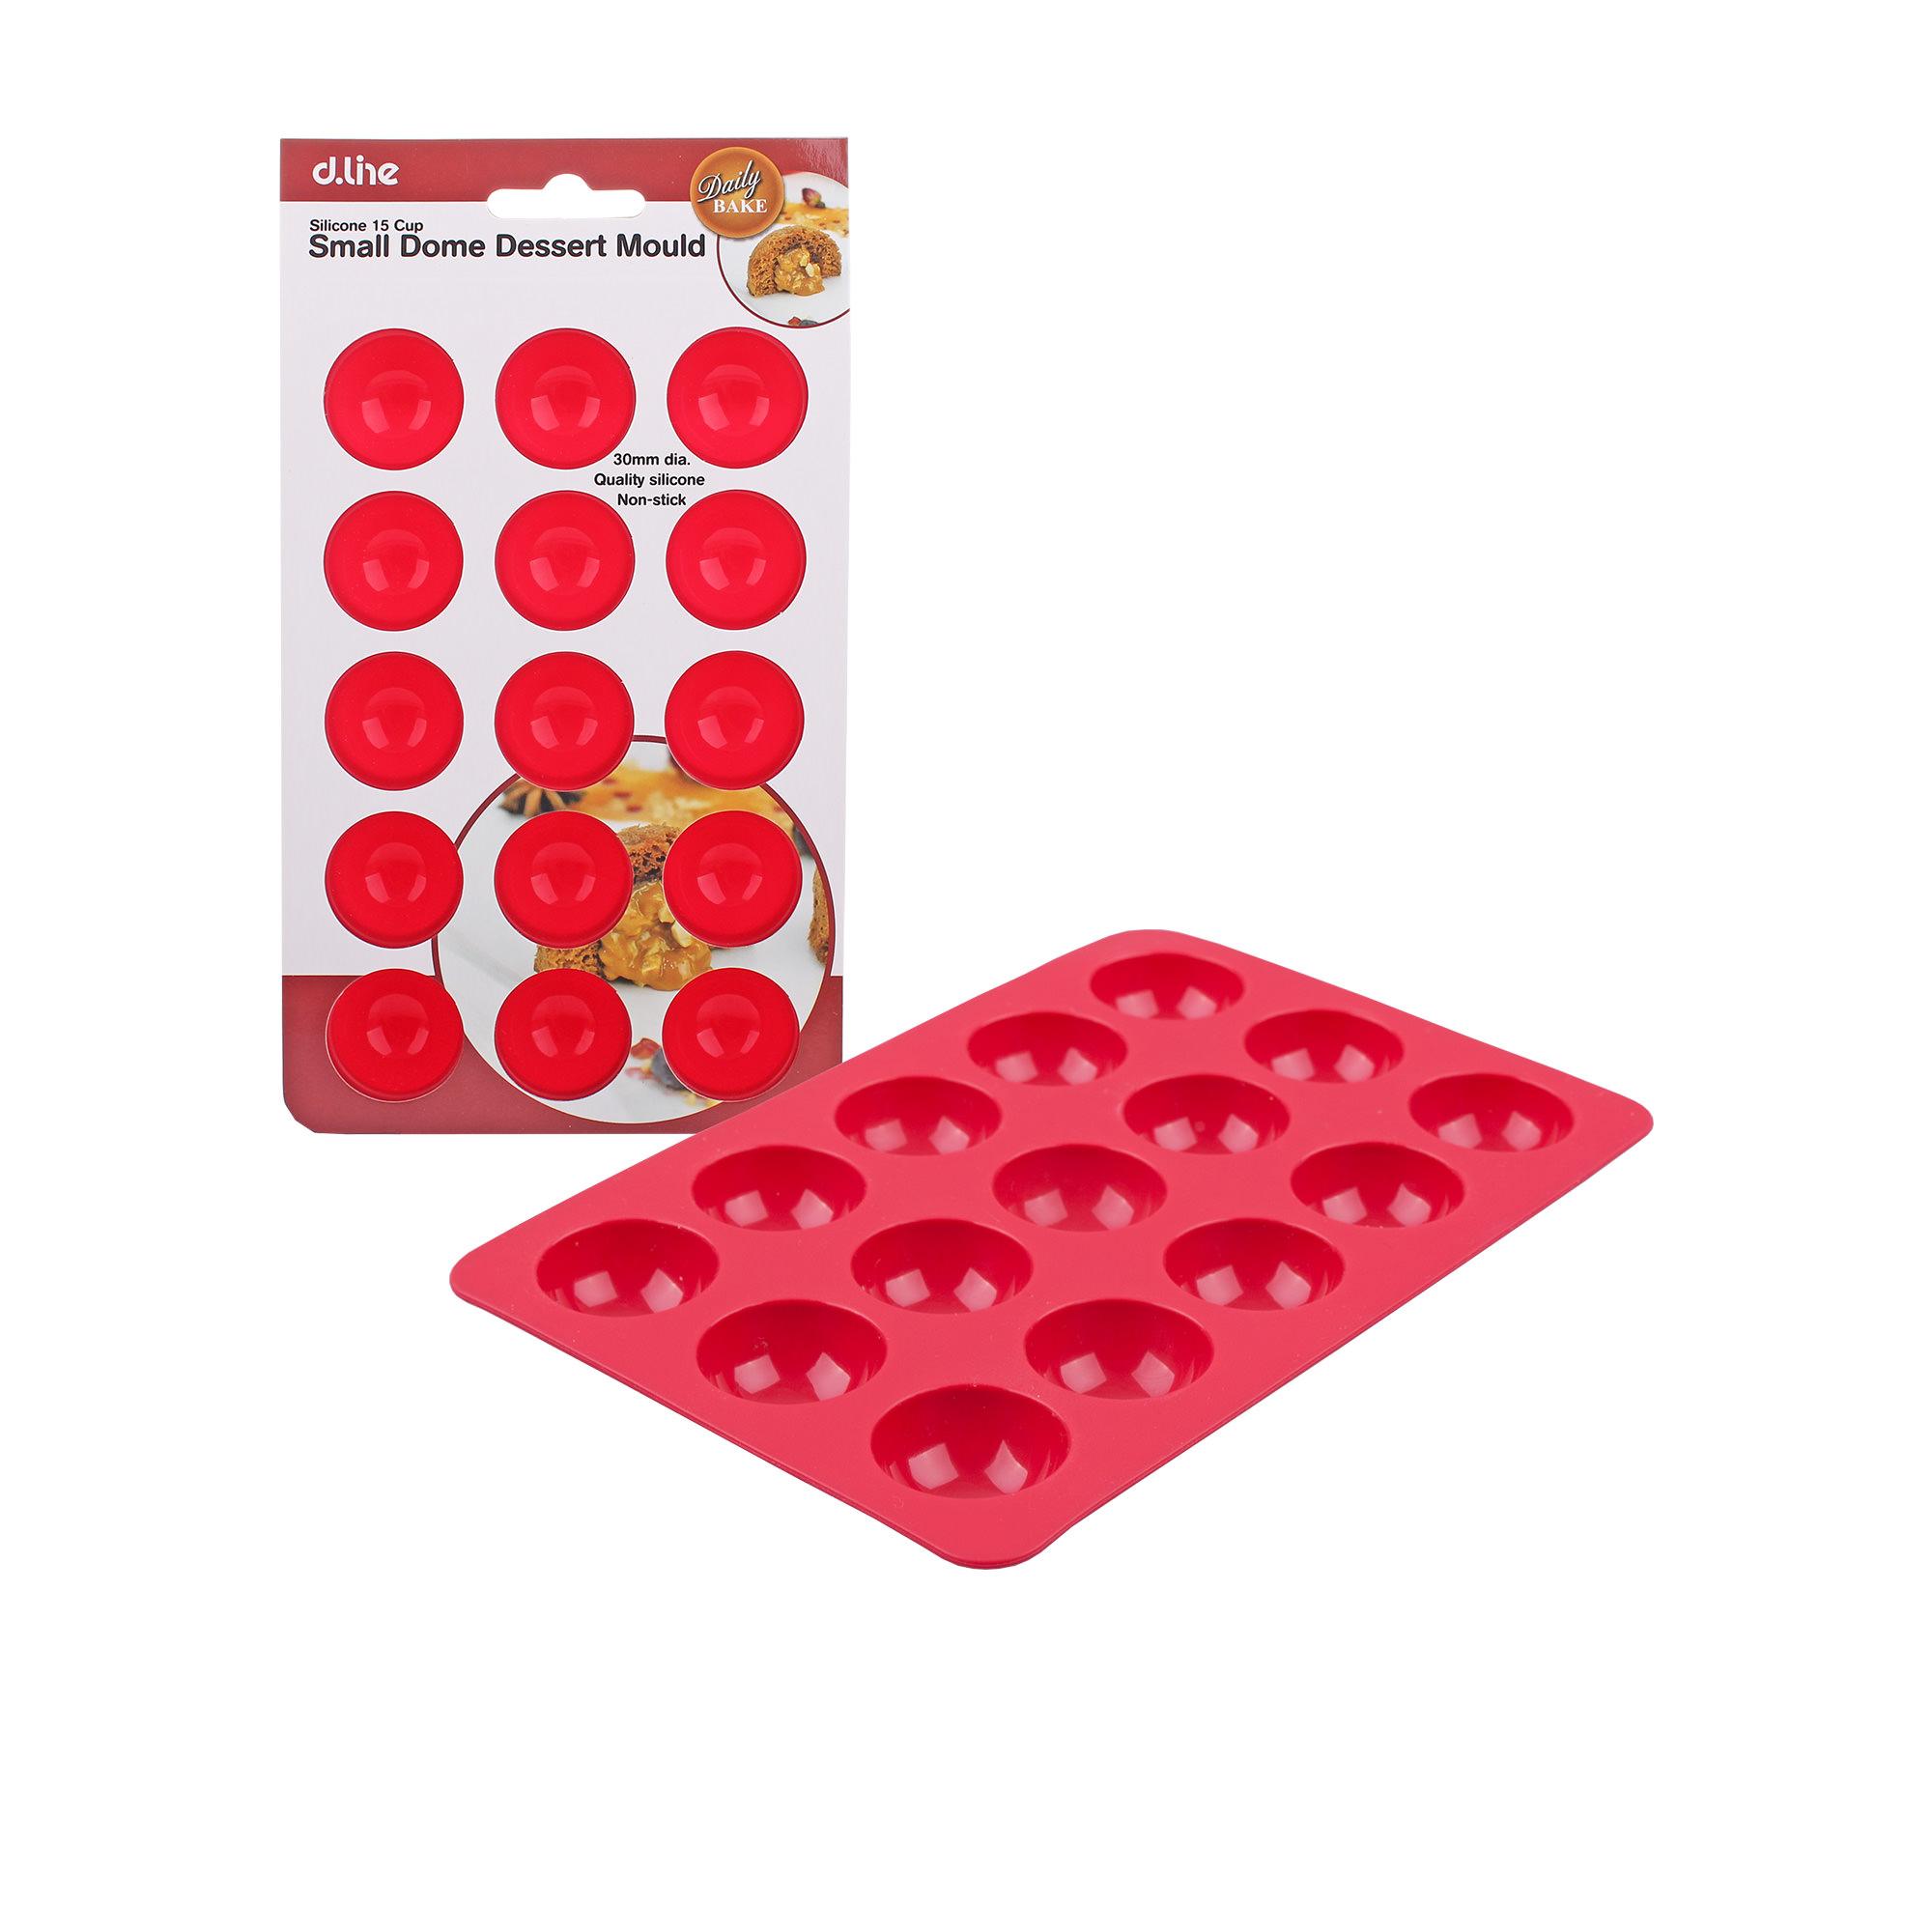 Daily Bake Small Dome Dessert Mould 15 Cup Red Image 3